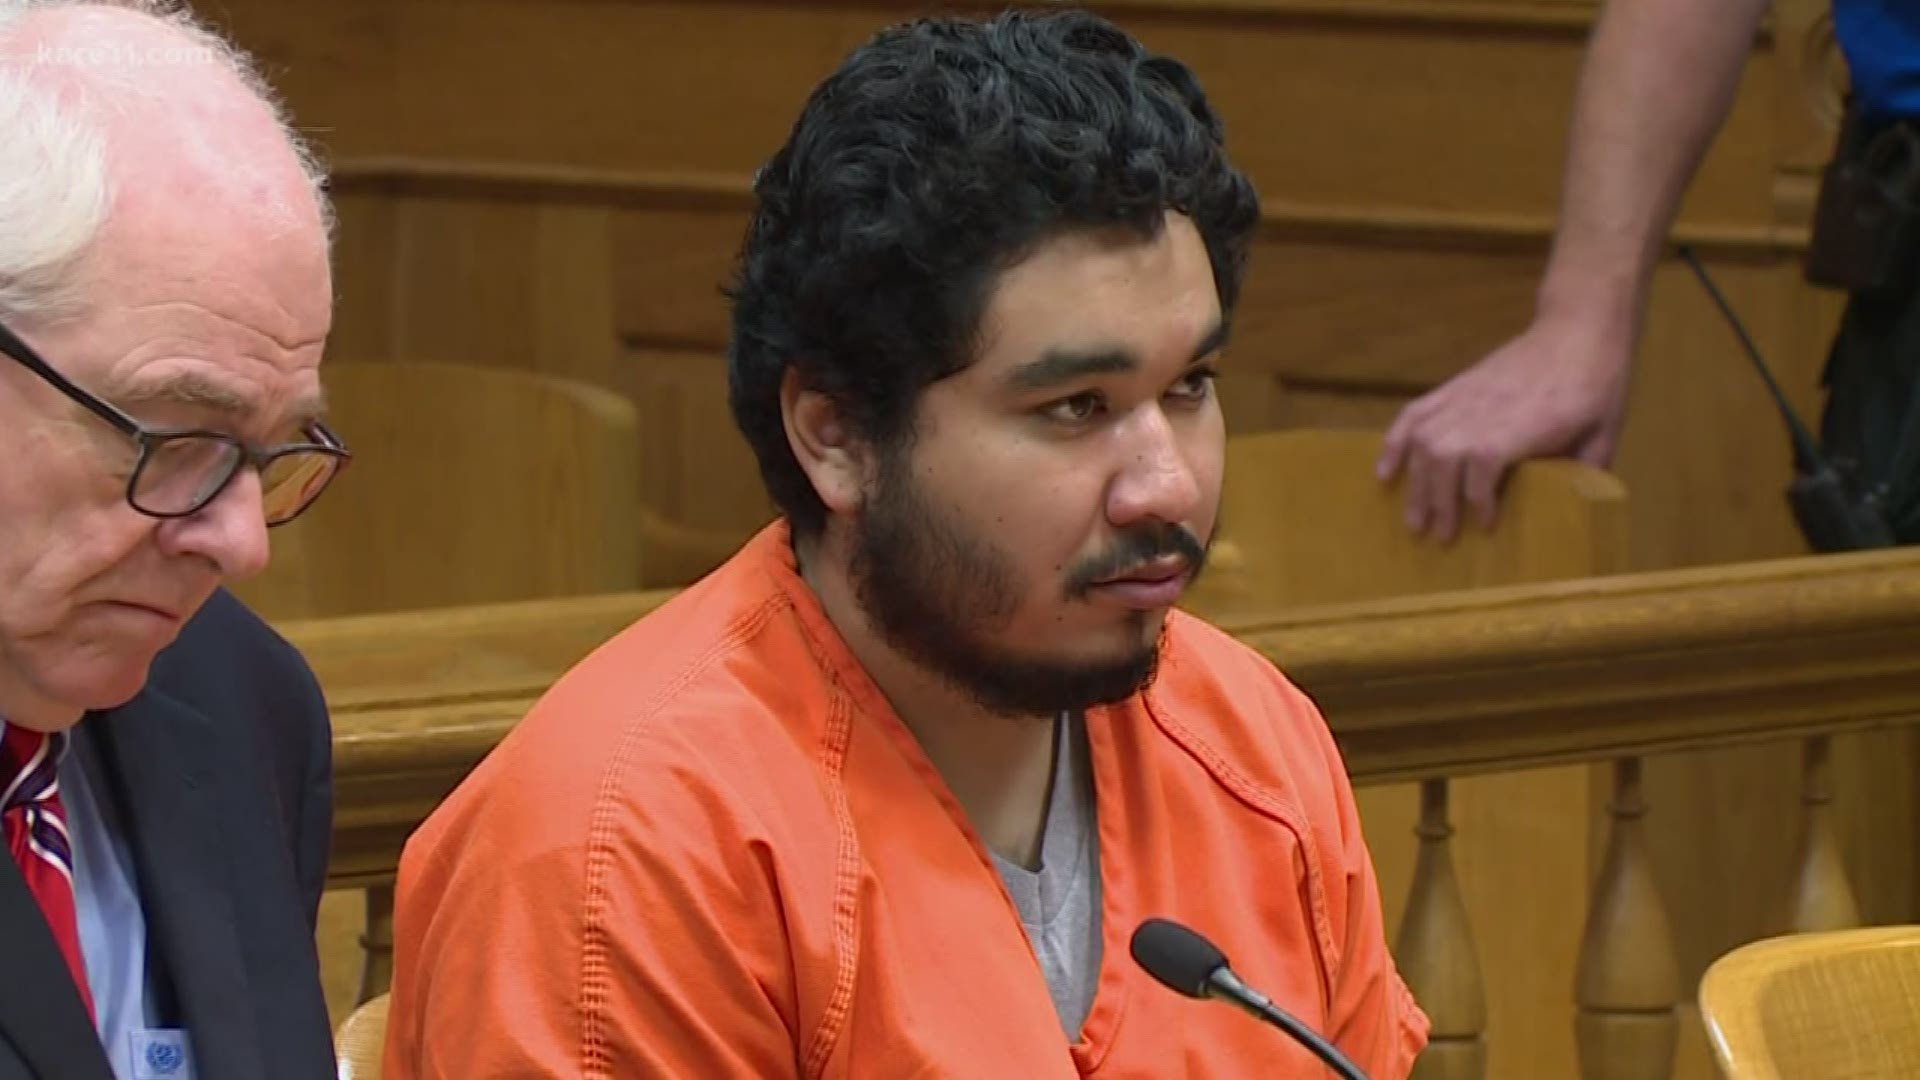 The crime was shocking - a 19-year-old beat an 80-year-old man nearly to death for no apparent reason. Tuesday, the suspect Jesus Ibarra received a generous jail sentence. KARE 11's Lou Raguse has the latest from the courtroom. https://kare11.tv/2Ifqfy3